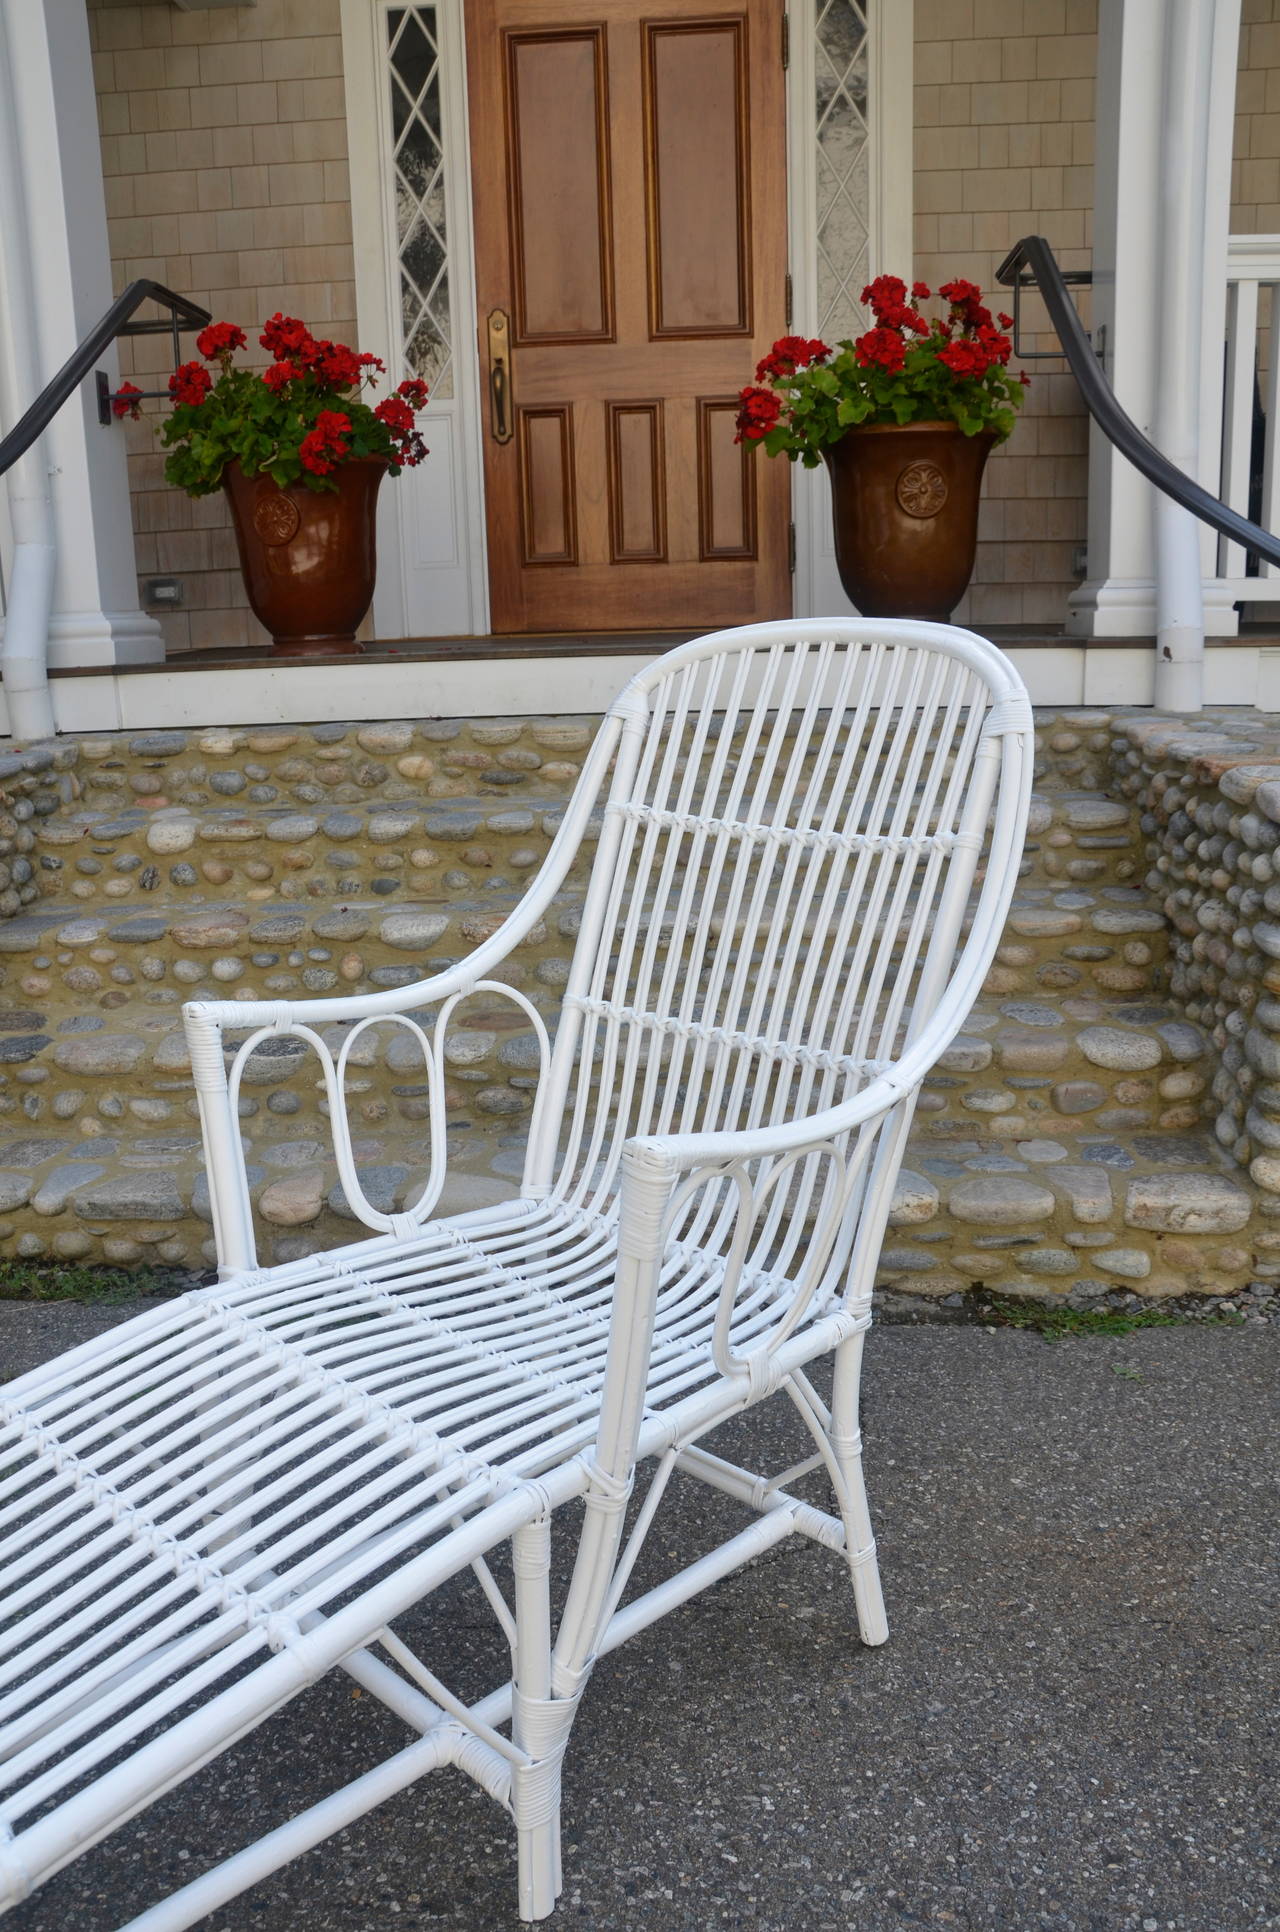 Heywood Wakefield Stick Wicker Chaise In Good Condition For Sale In Old Saybrook, CT